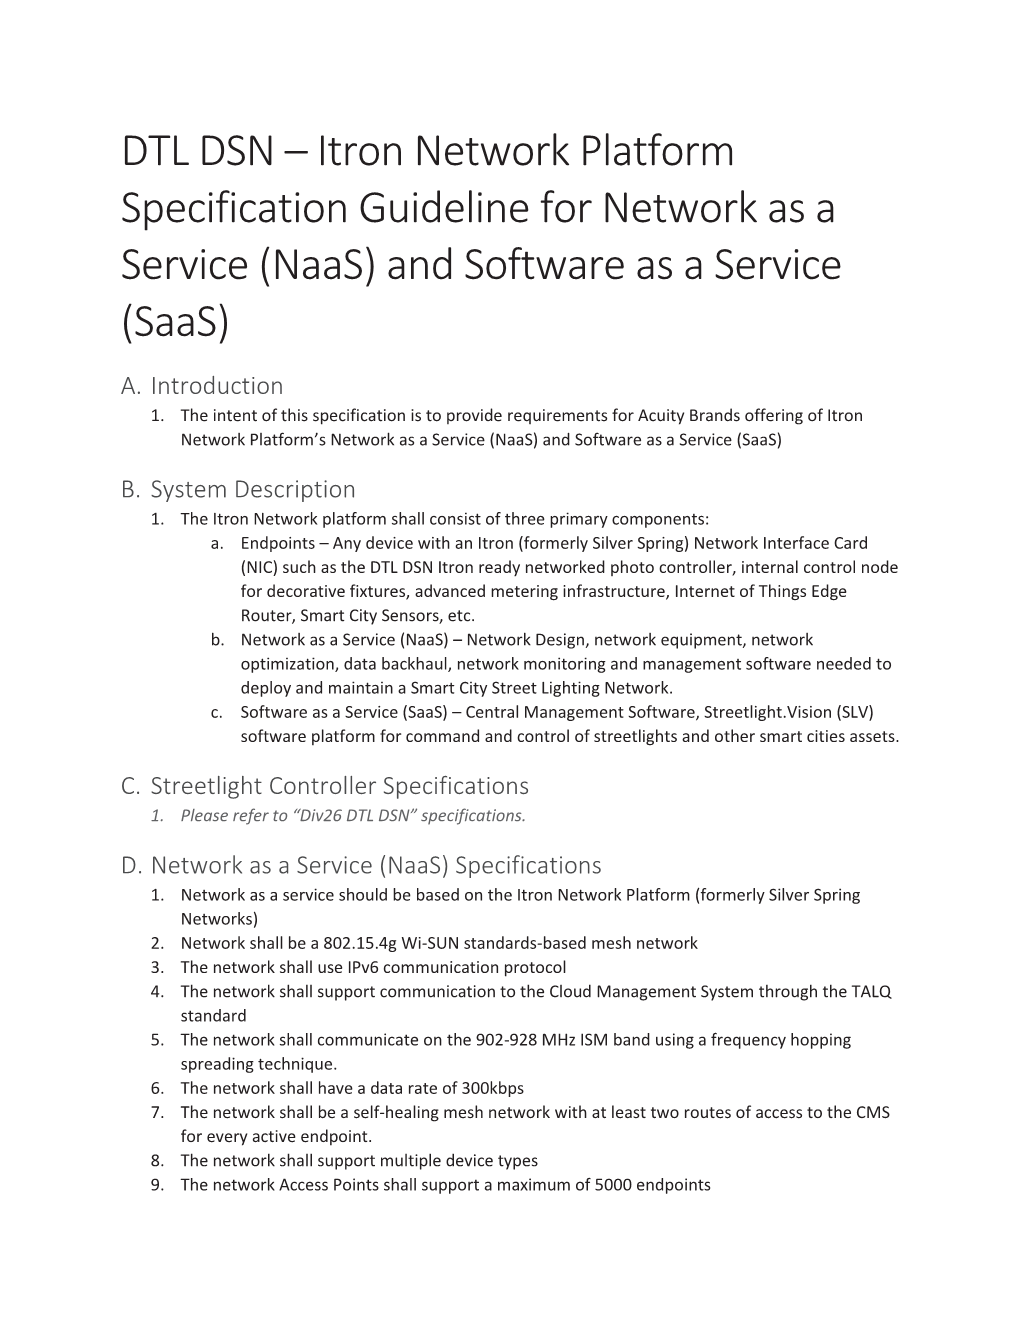 DTL DSN Itron Network Platform Specification Guideline for Naas